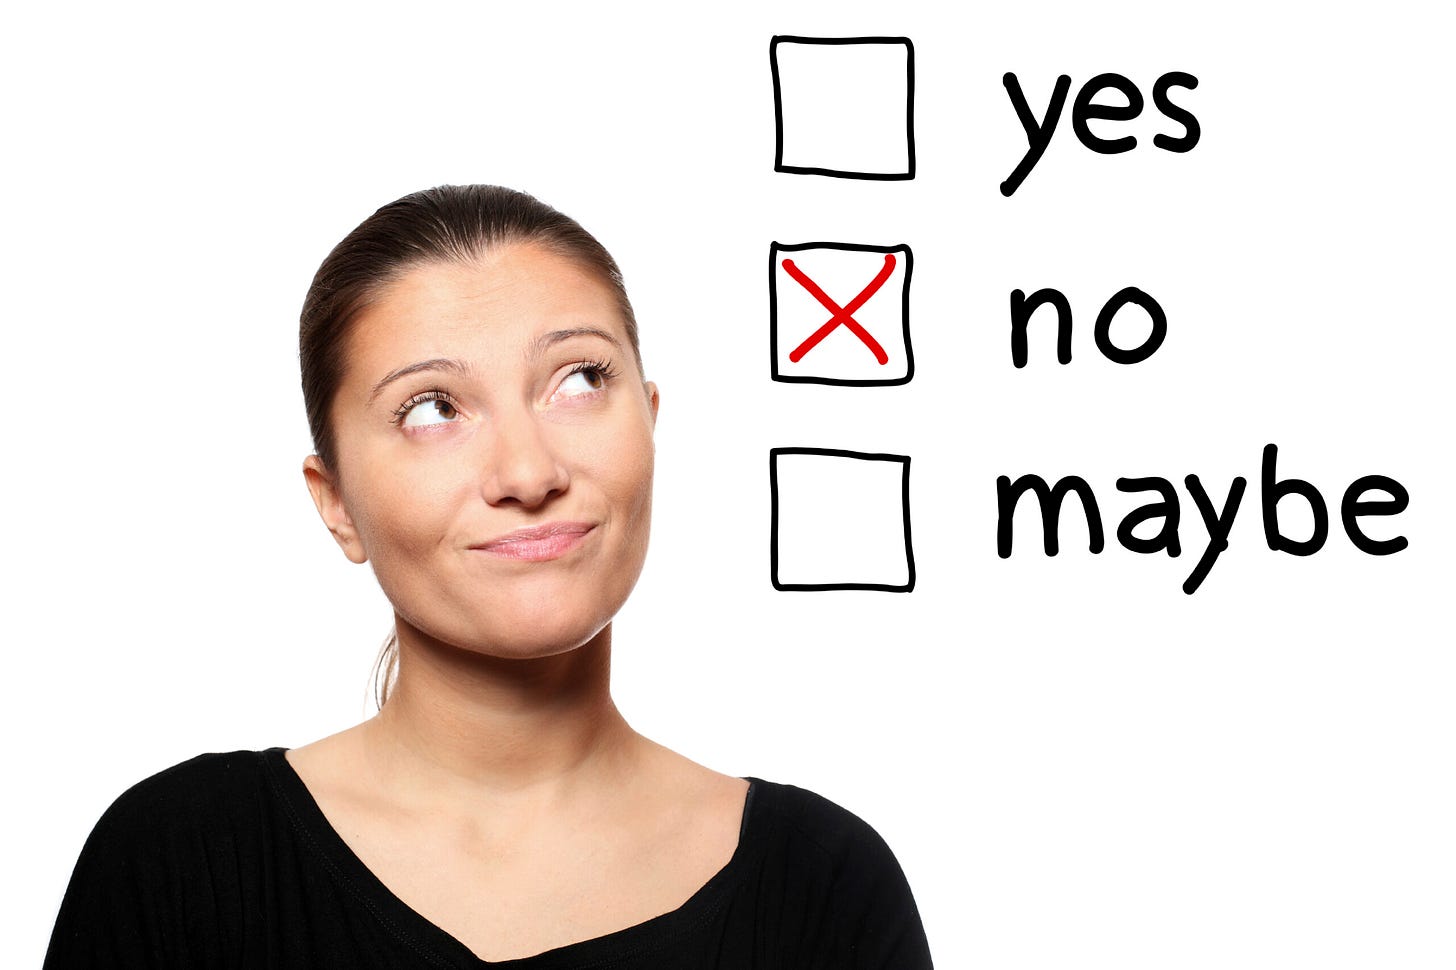 Be Productive by Saying No - The 1 Thing